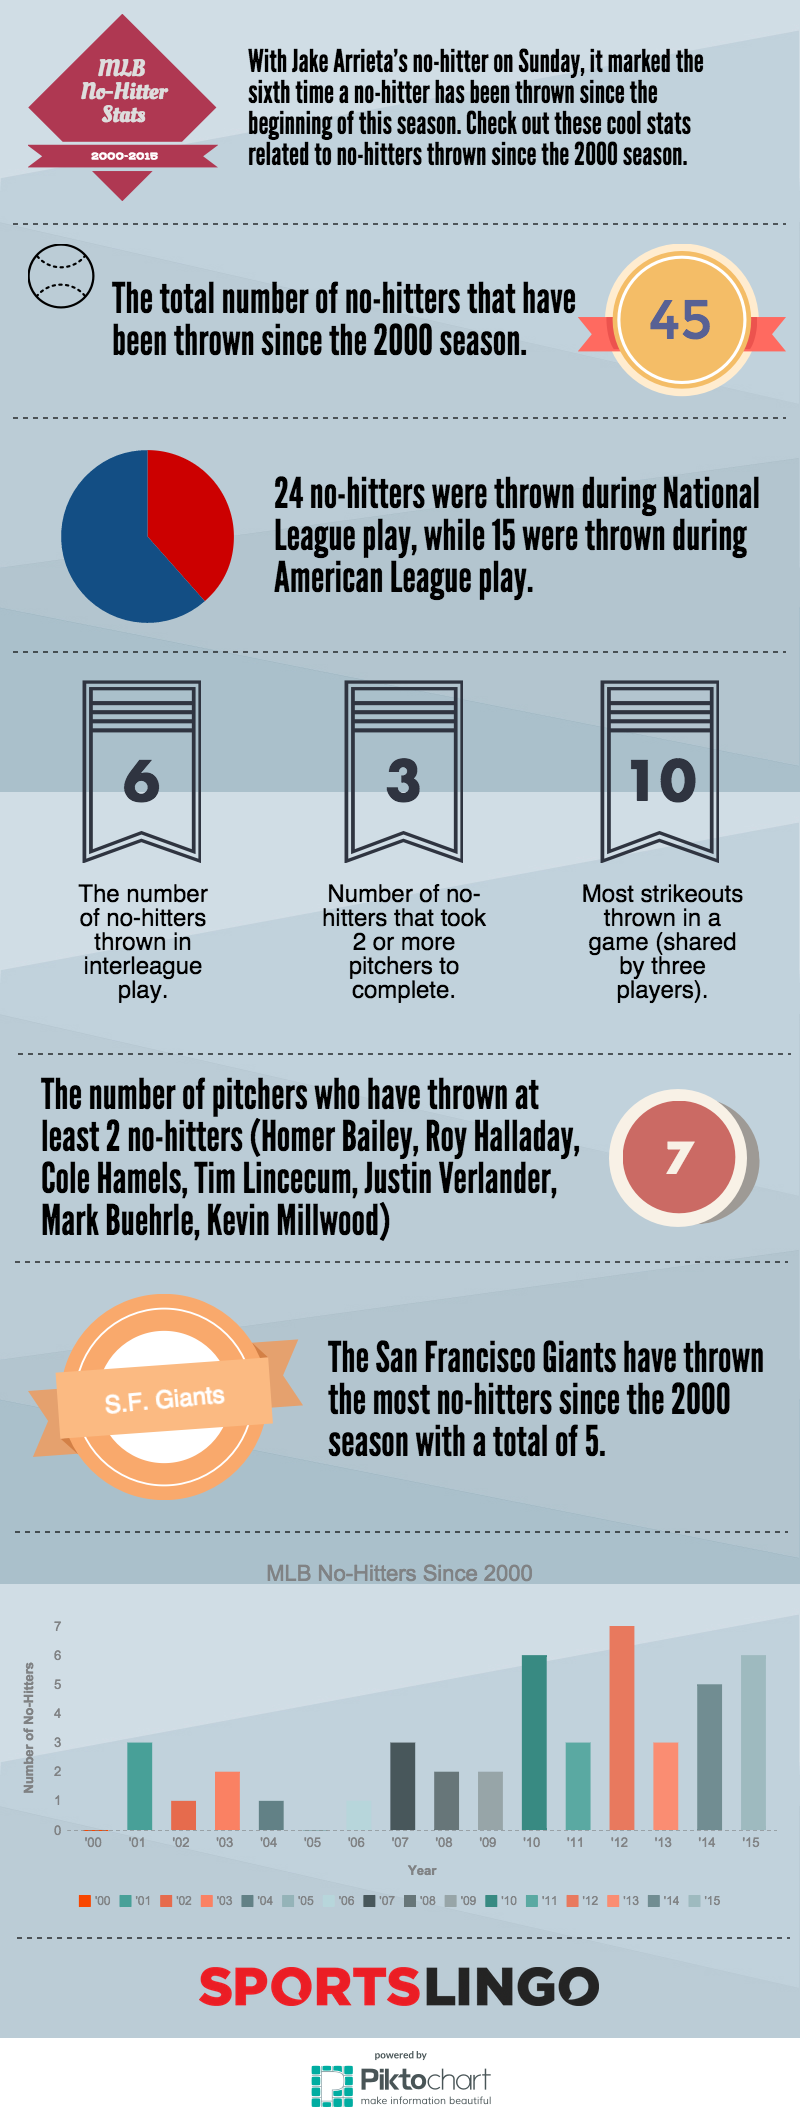 INFOGRAPHIC: No-Hitter Stats Since The 2000 Season